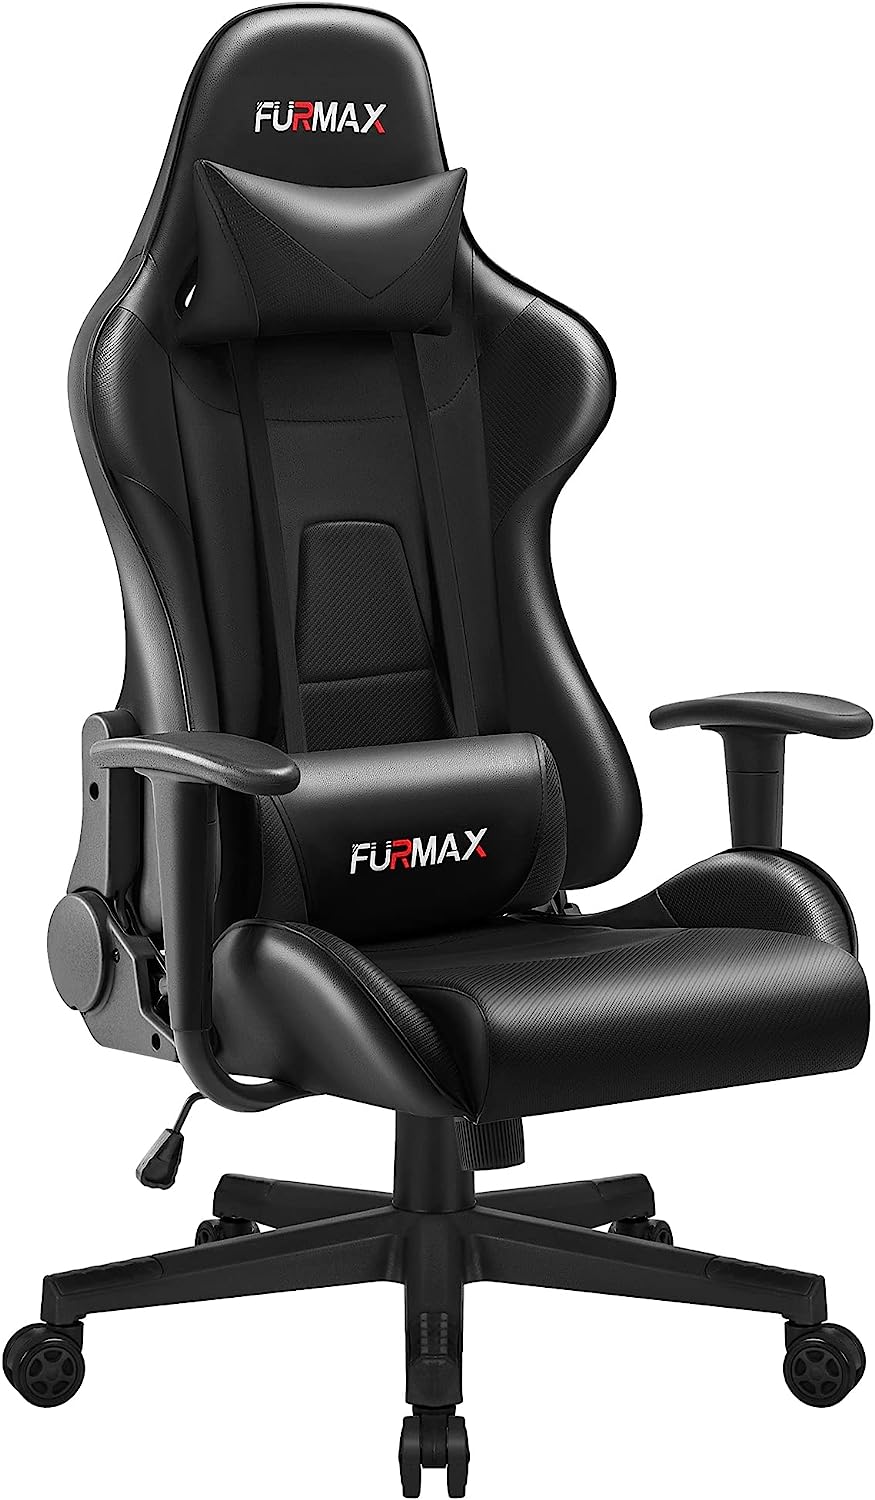 gaming chair under 100$